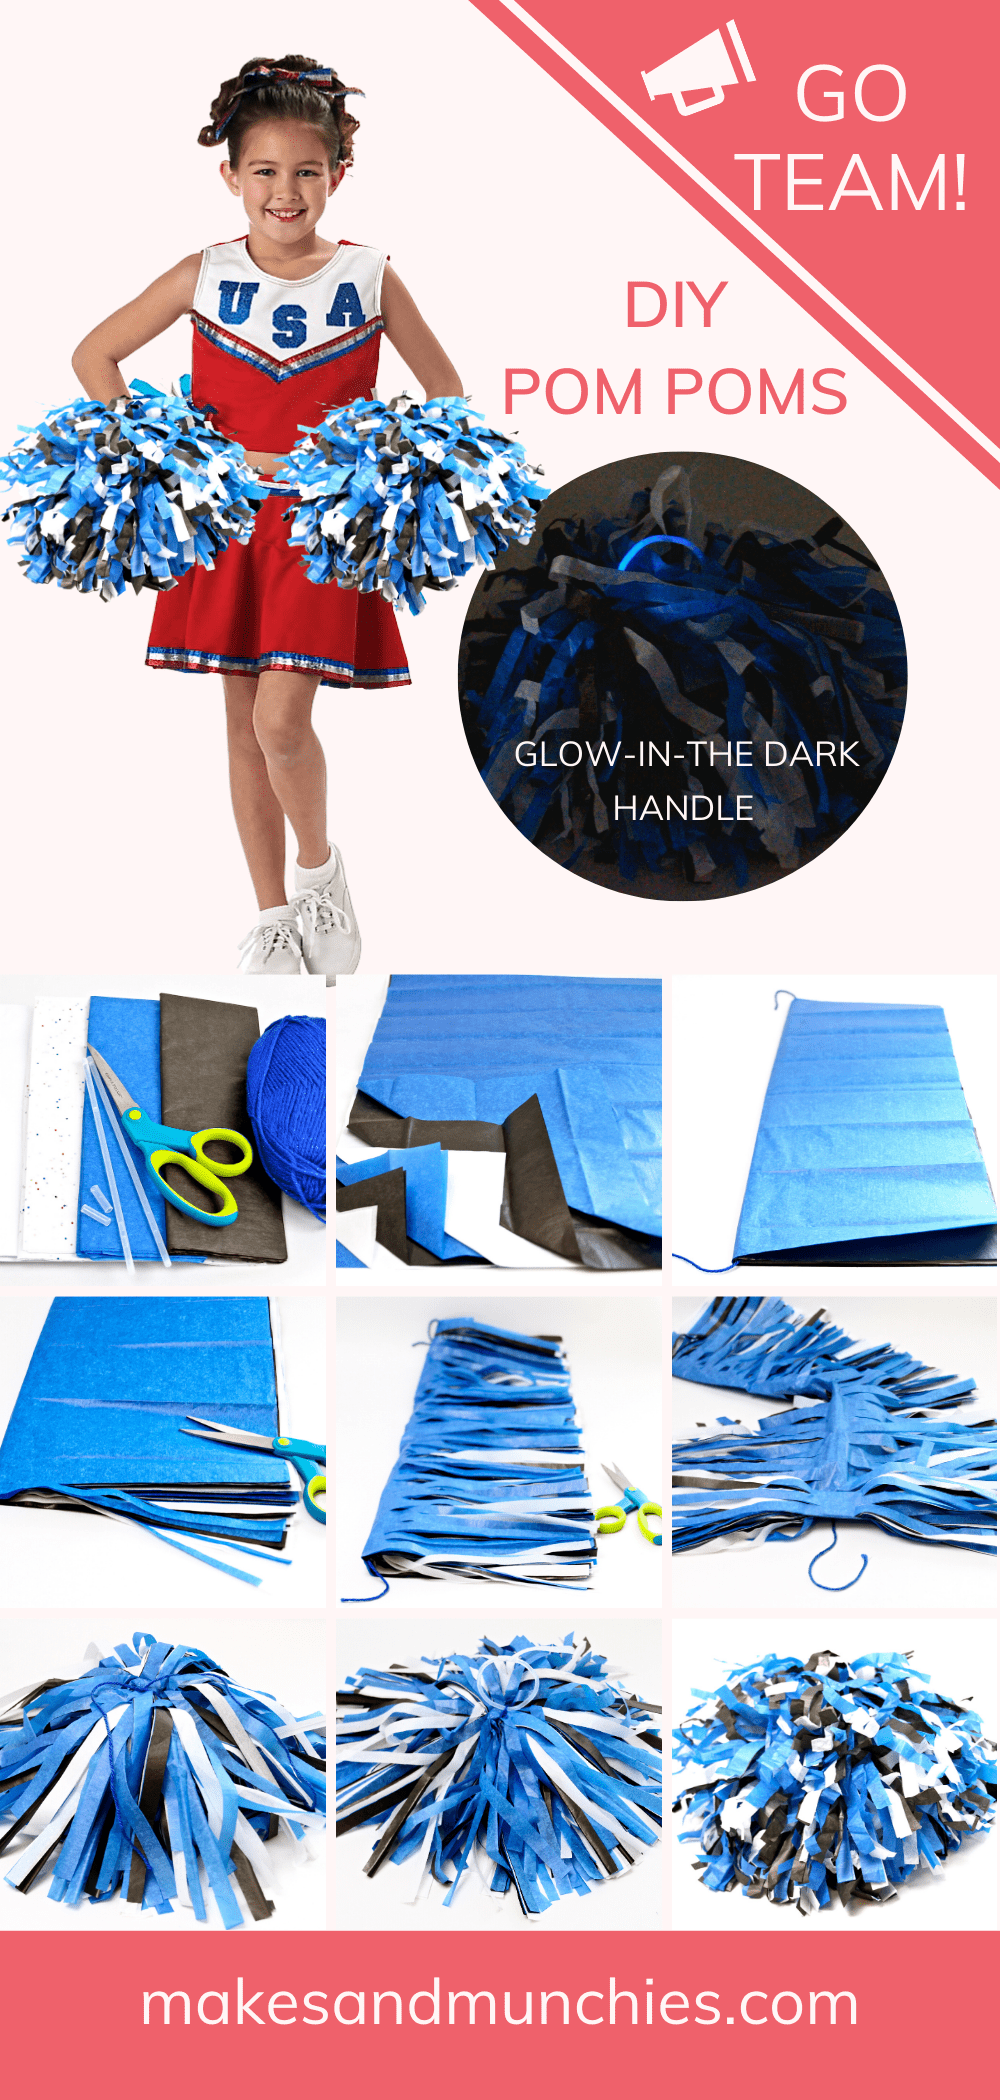 DIY Cheerleading Pom Poms - Makes and Munchies